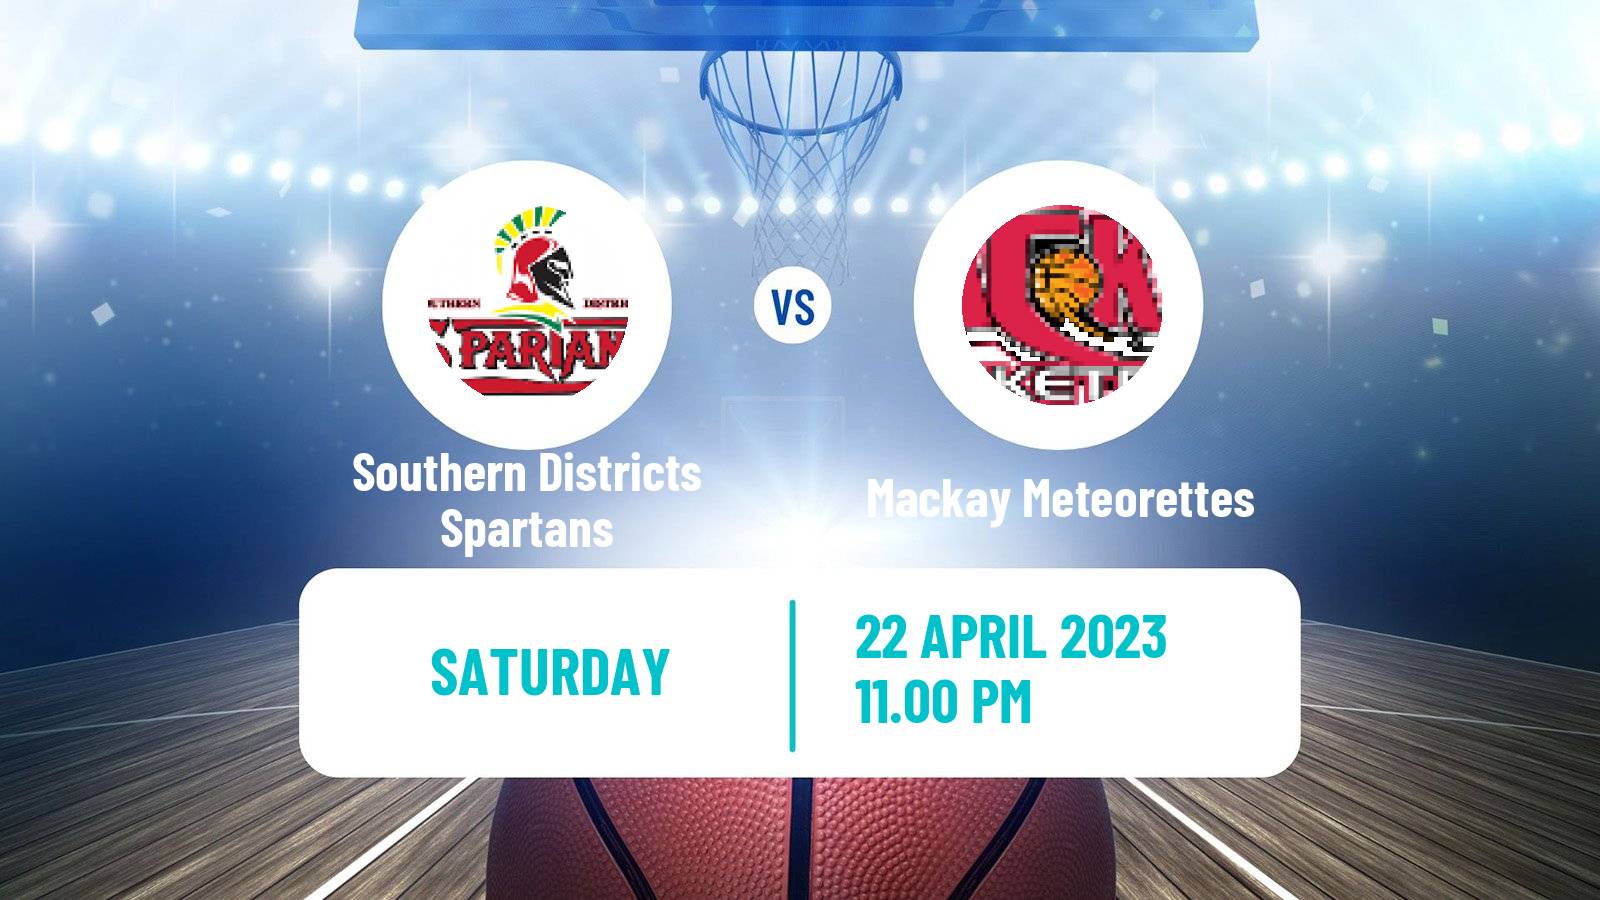 Basketball Australian NBL1 North Women Southern Districts Spartans - Mackay Meteorettes